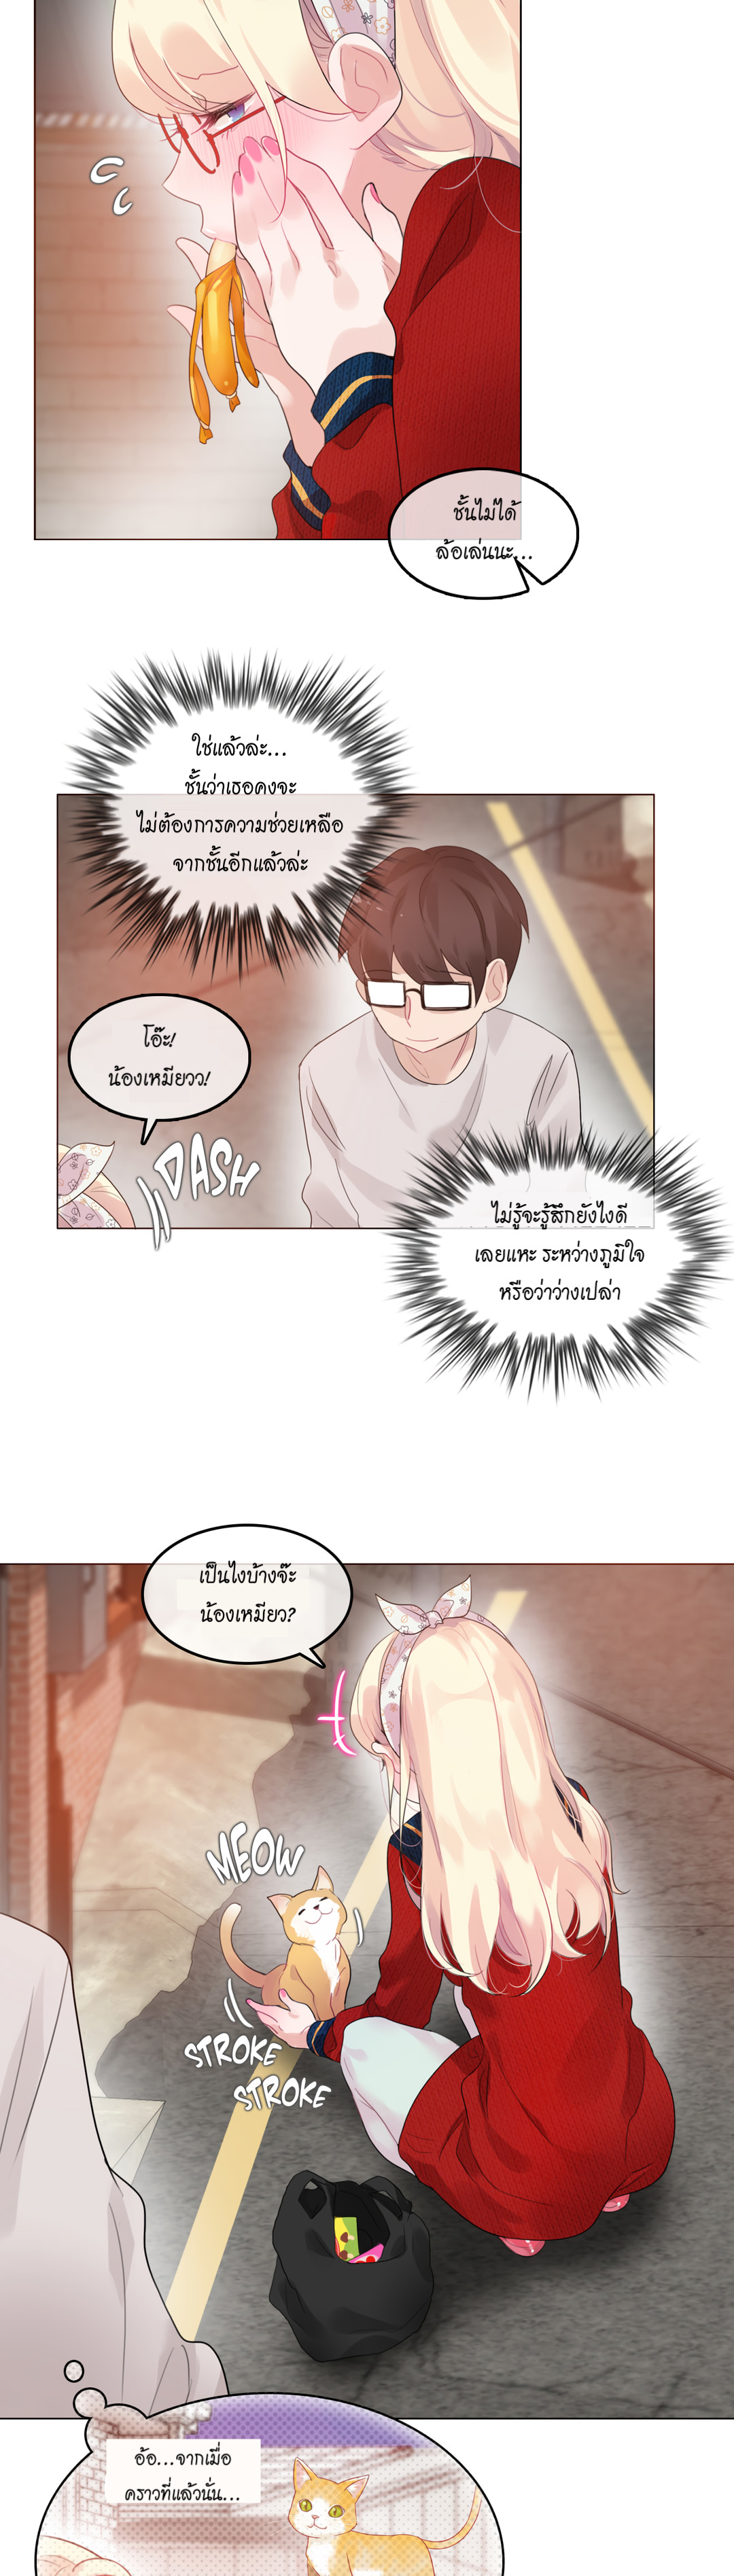 A Pervert’s Daily Life54 (17)